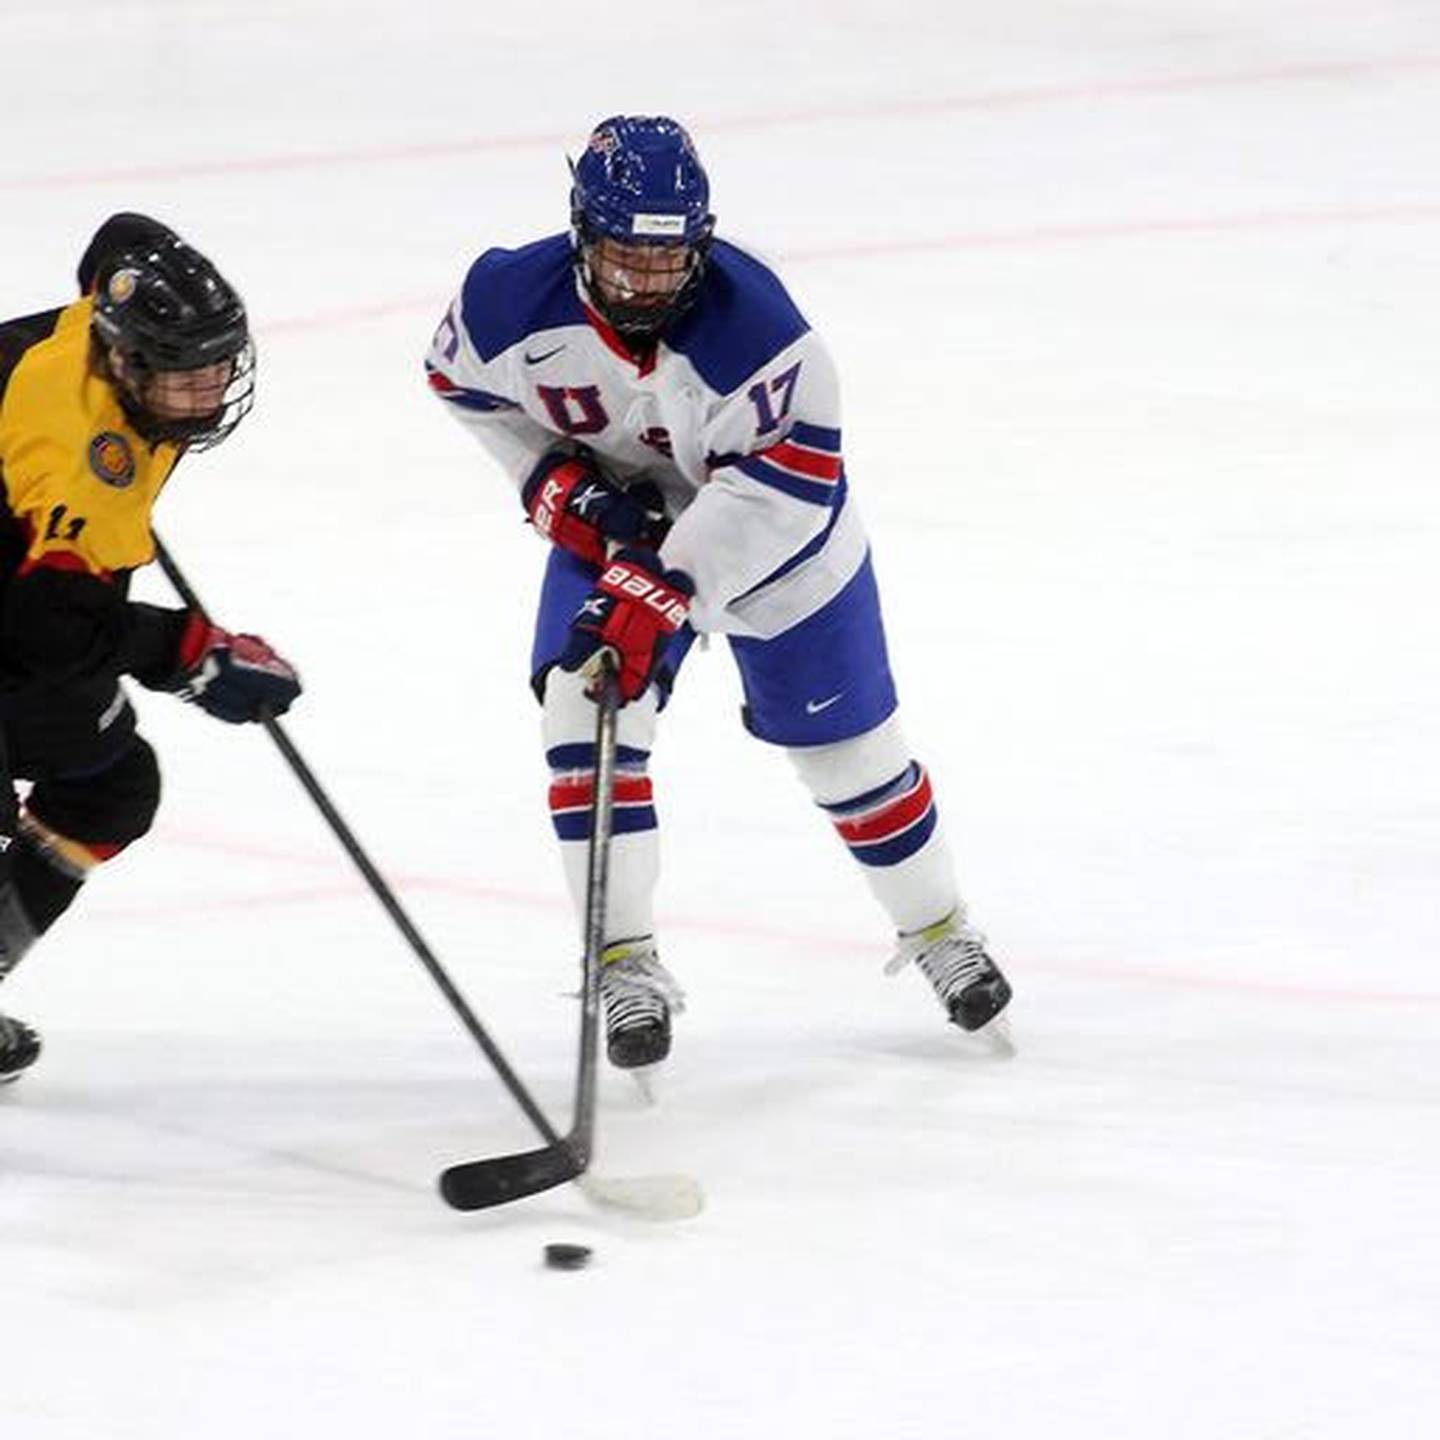 Team USA's Mac Swanson of Anchorage skates with the puck during a game at the Under-17 Five Nations Tournament